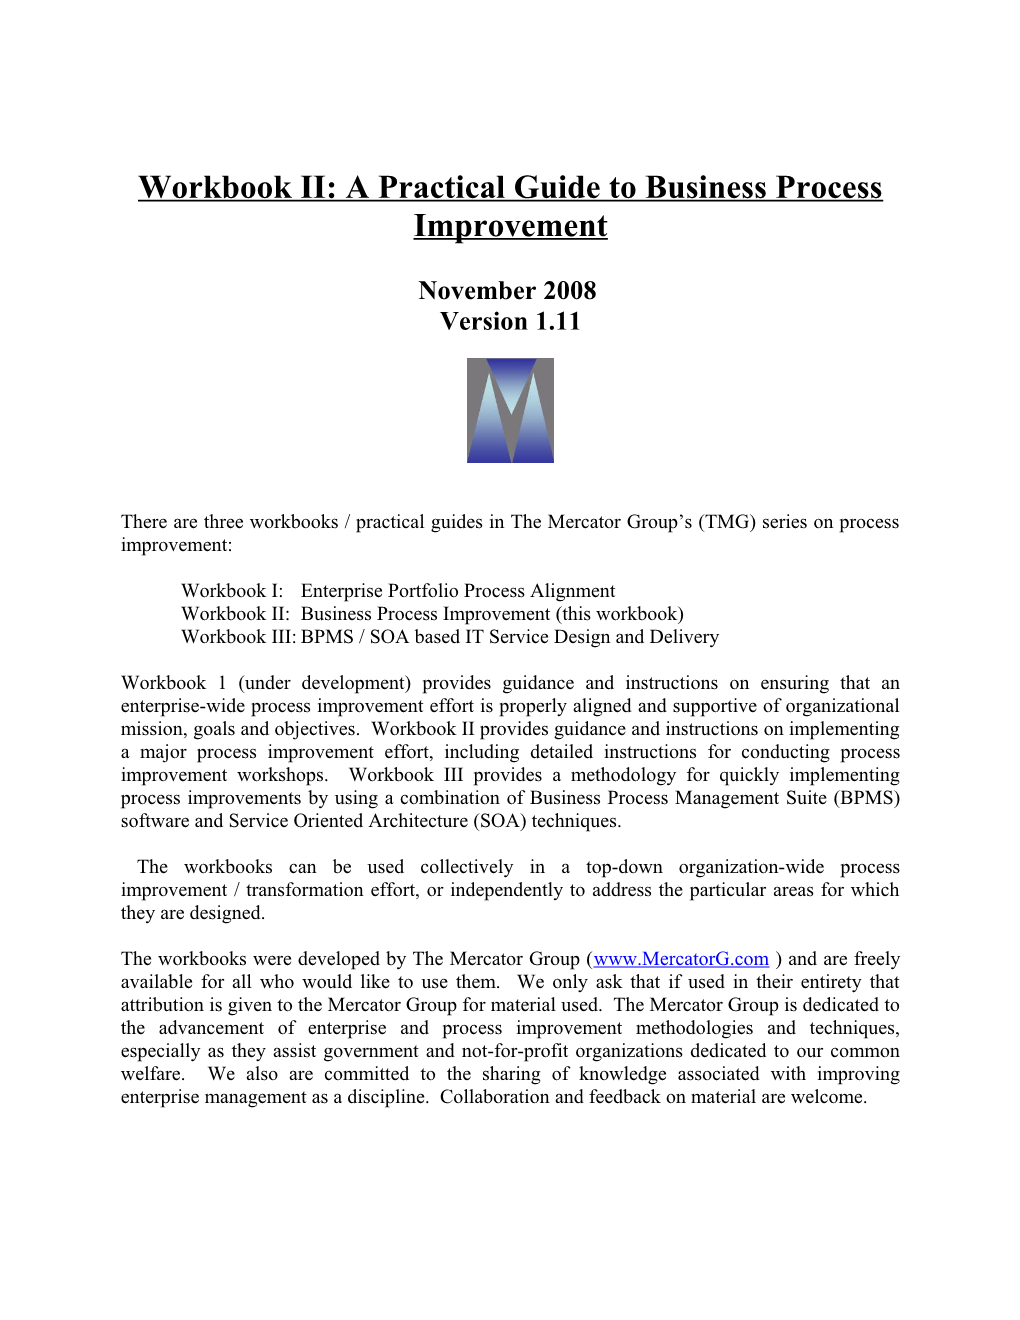 Workbook II: a Practical Guide to Business Process Improvement